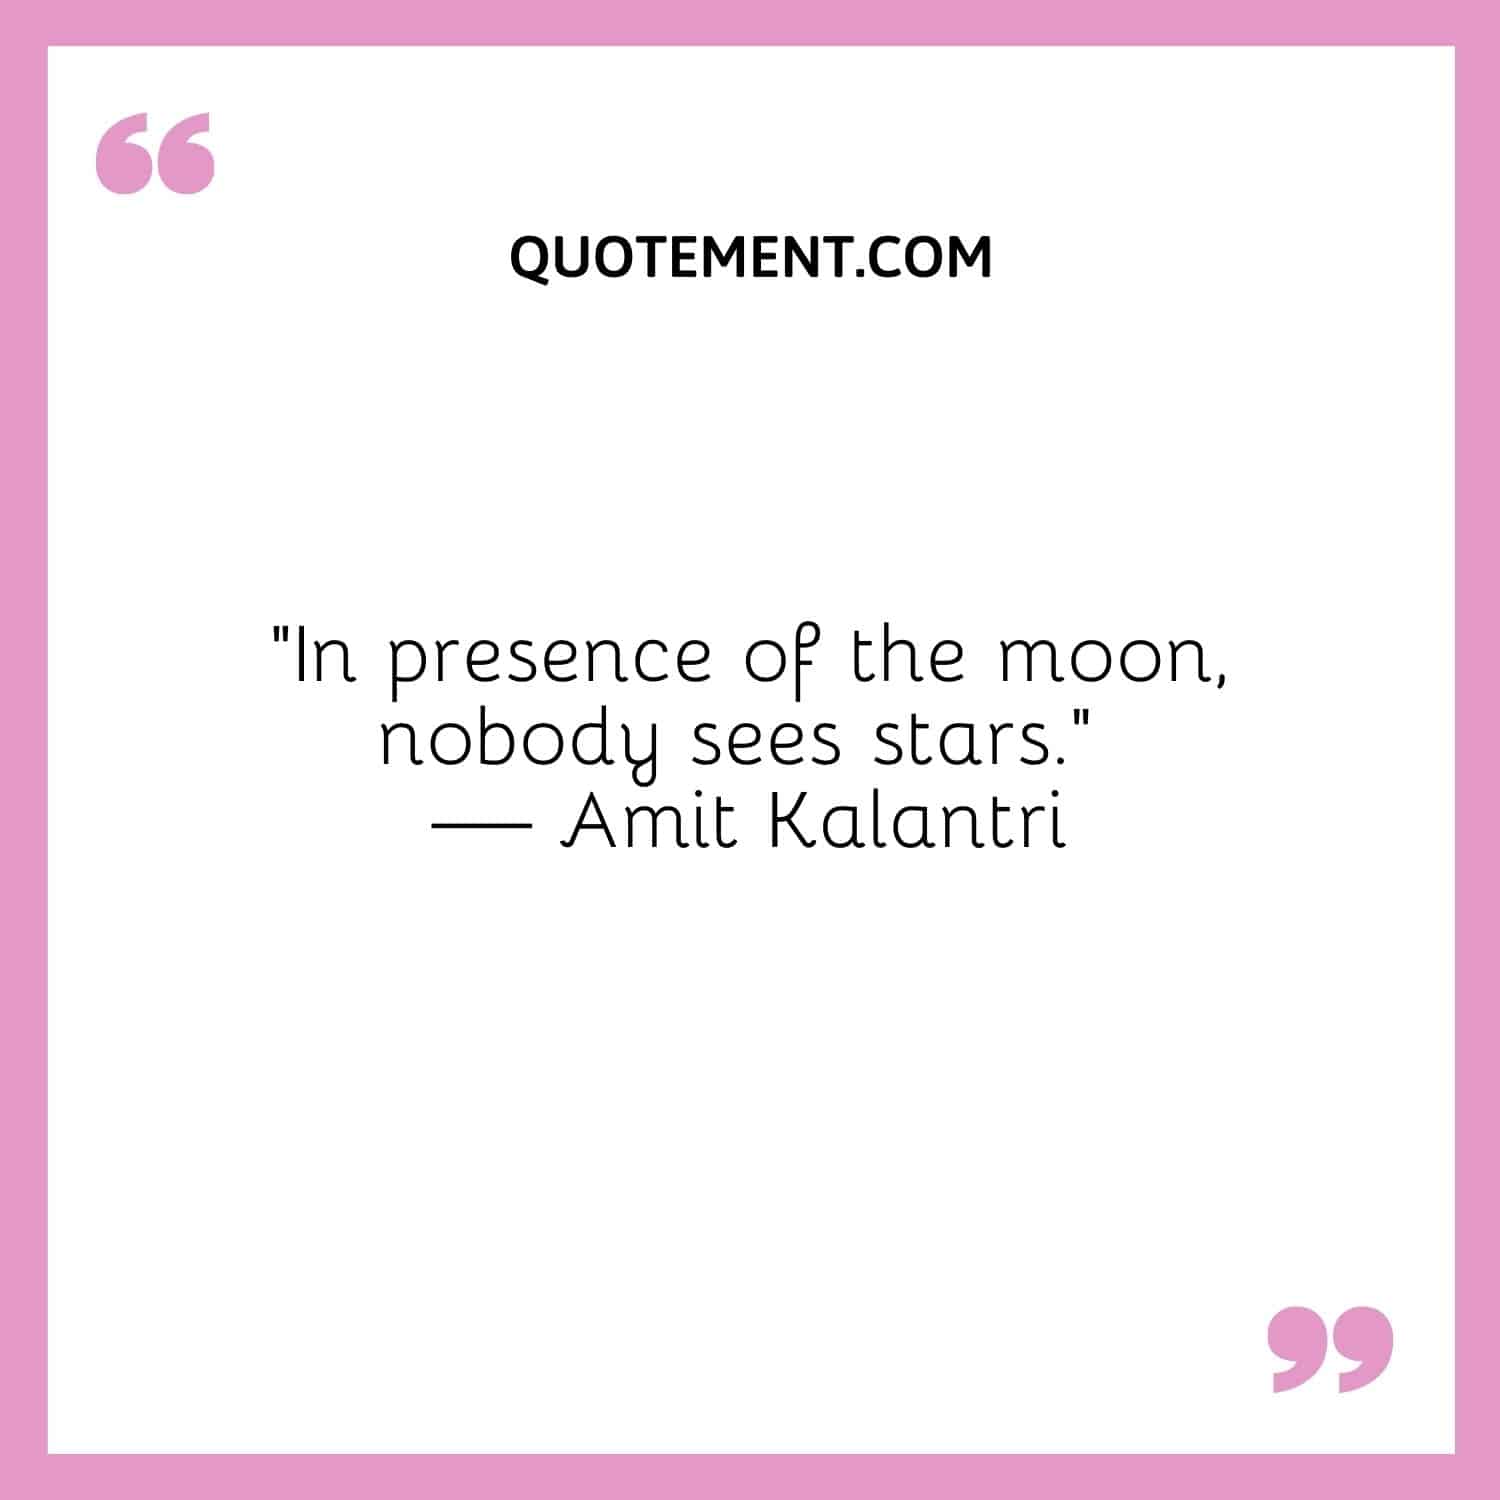 “In presence of the moon, nobody sees stars.” — Amit Kalantri